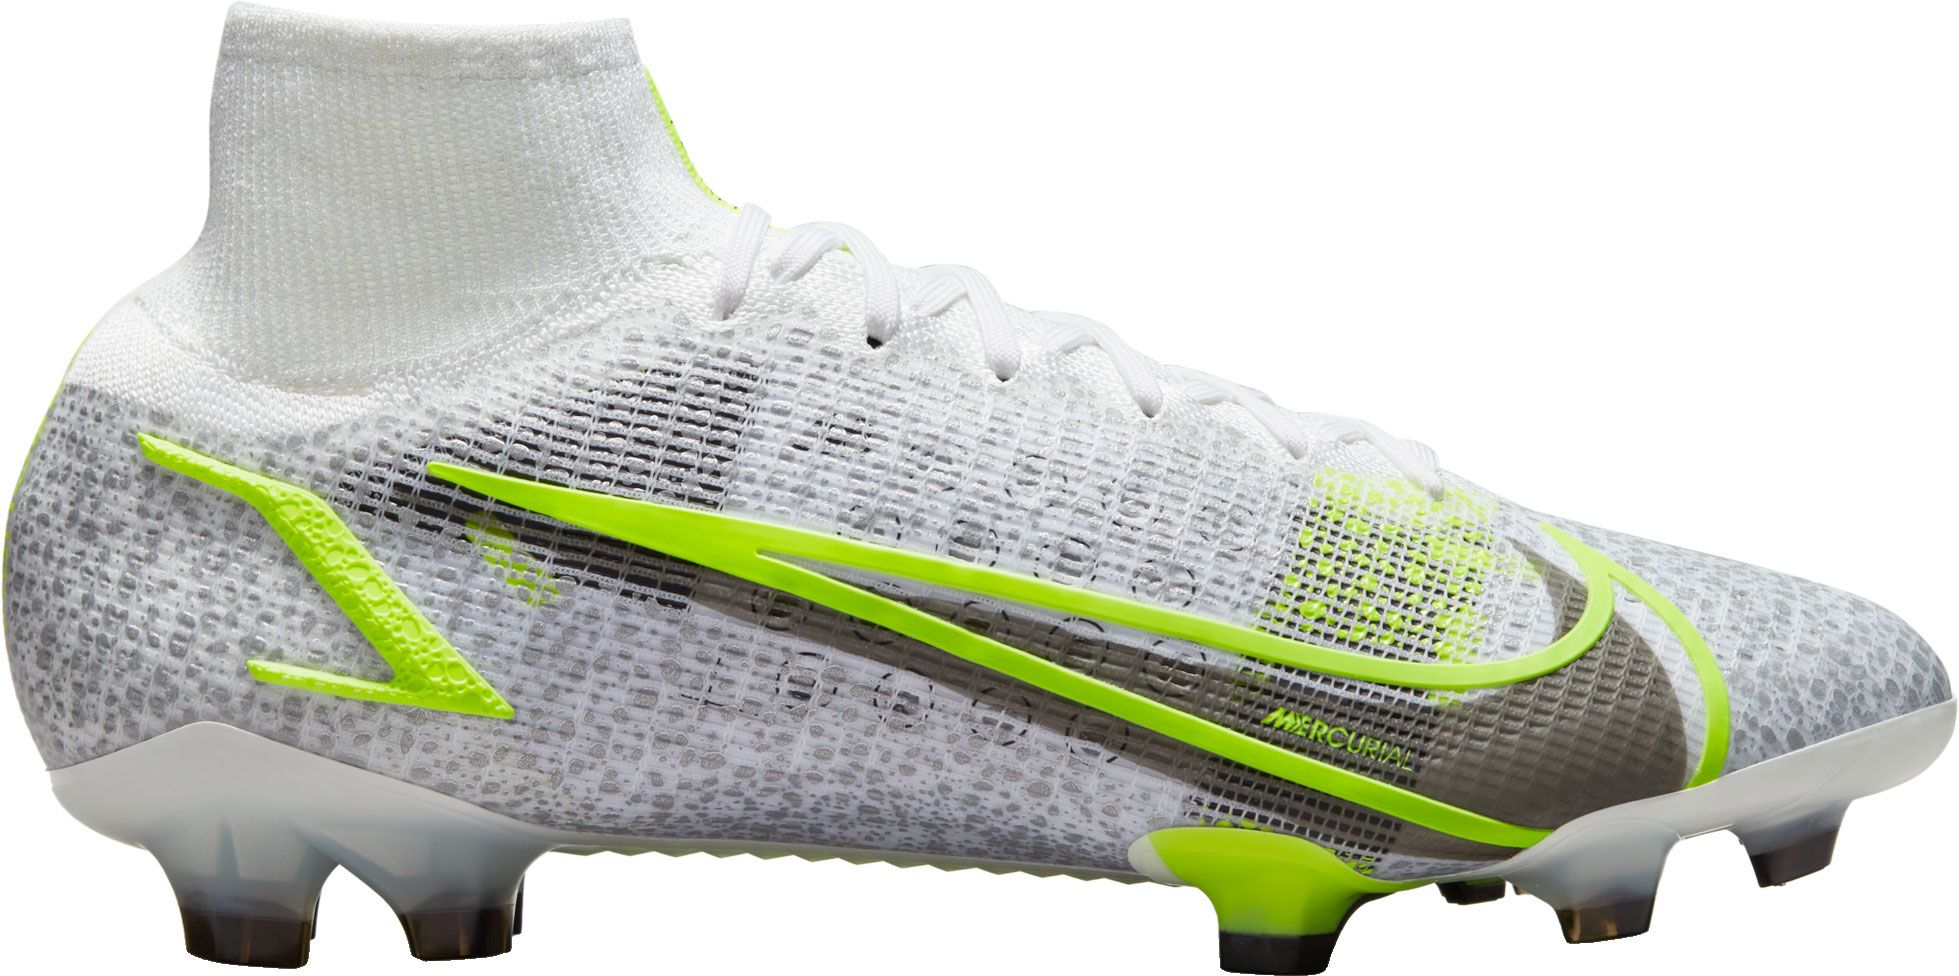 nicest soccer cleats